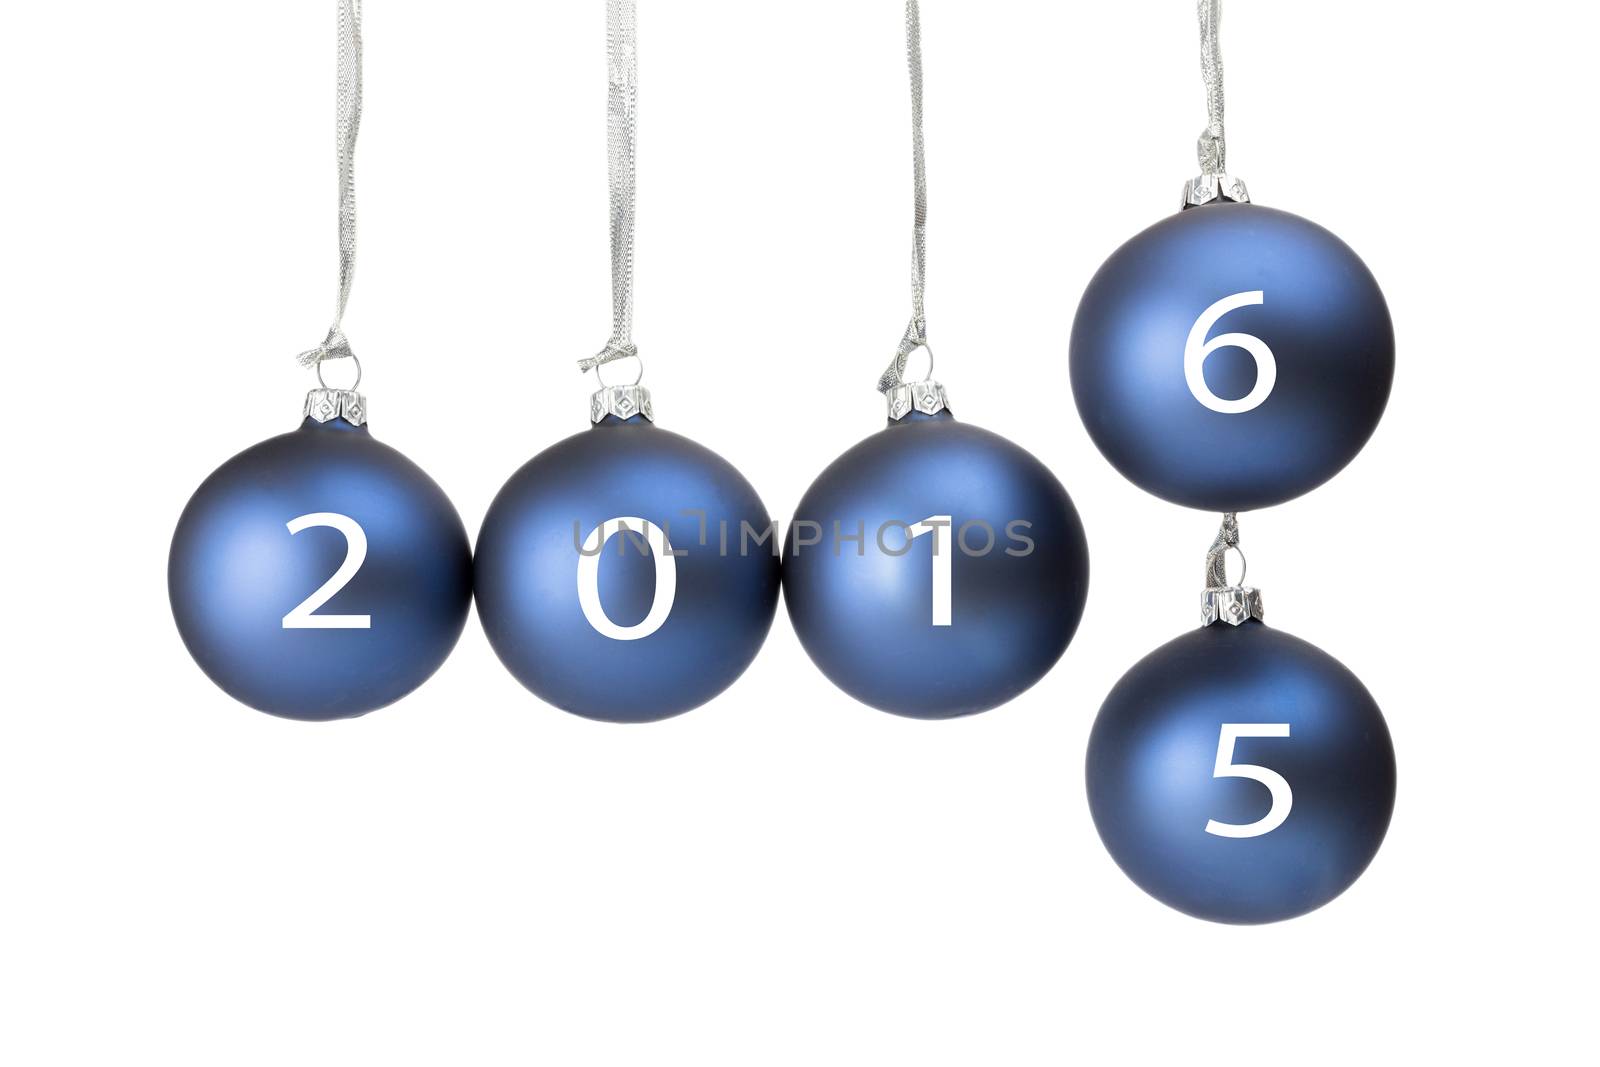 Five blue christmas baubles symbolizing old and new year by BenSchonewille